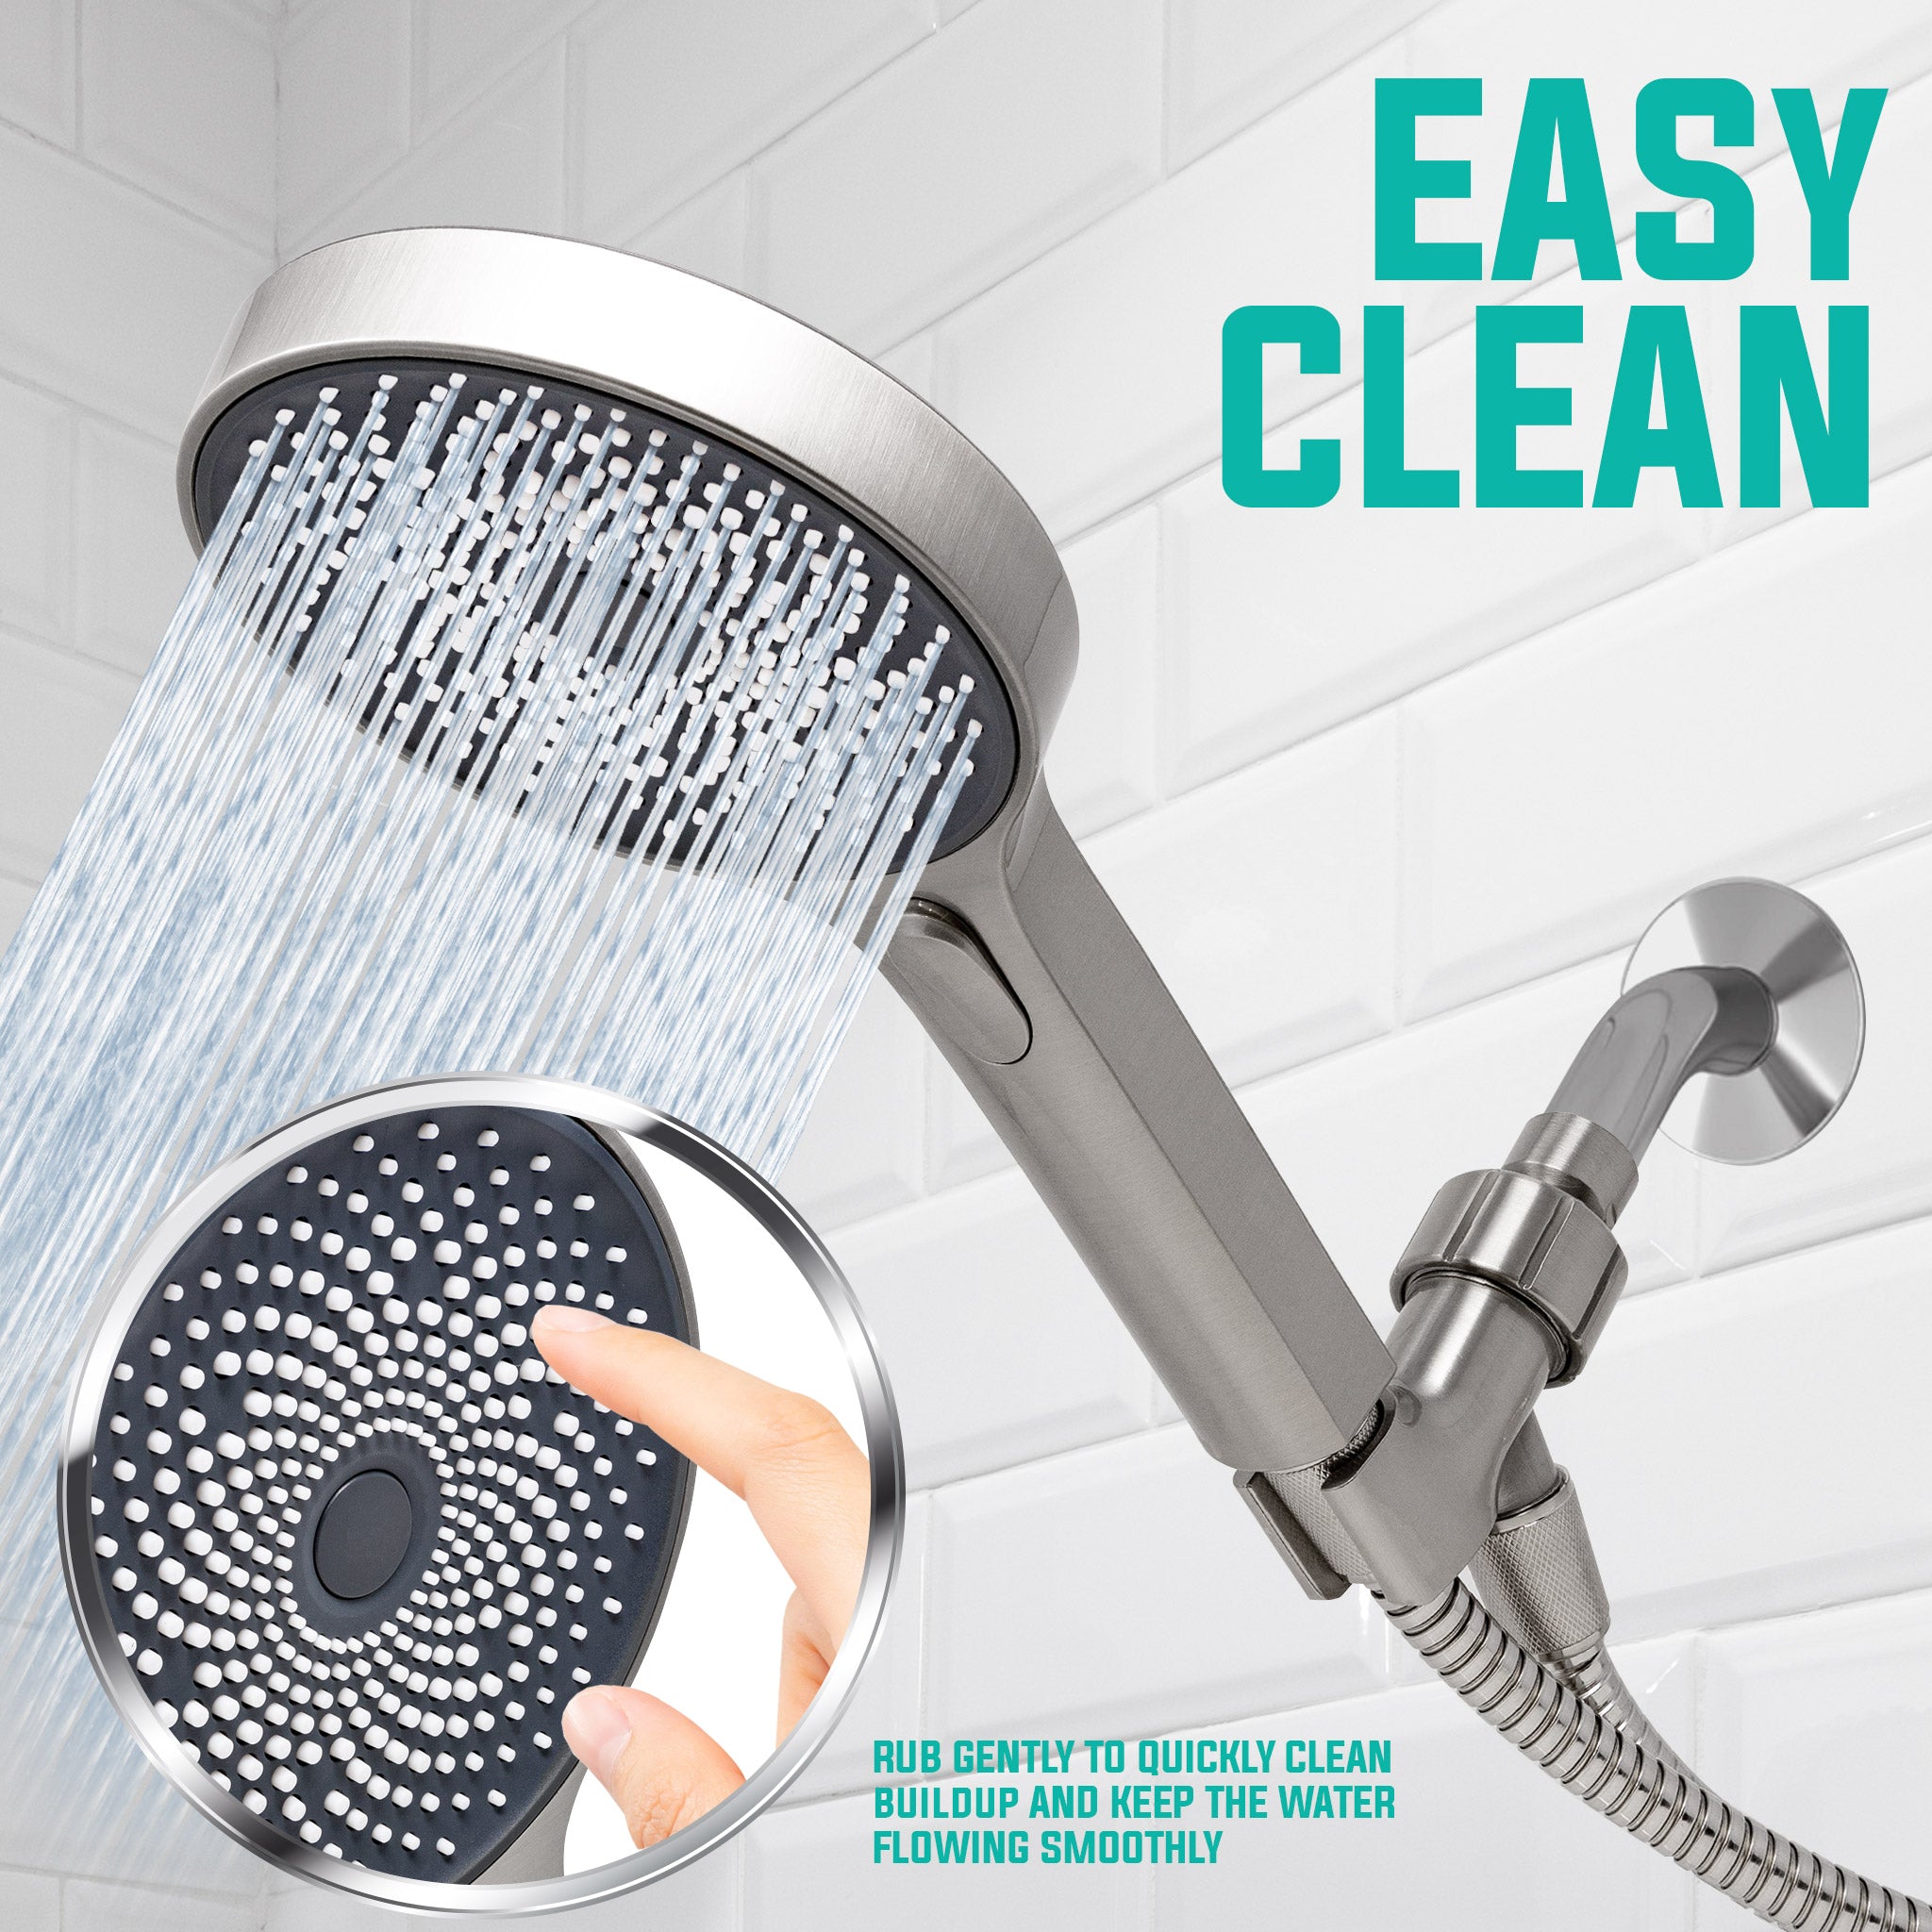 Metpure High-Pressure Handheld Shower Head with Easy Clicker - Multiple Spray Patterns. 5" Large Head for Waterfall Showering Experience. Stainless Steel Hose & Adjustable Mount Holder. Brushed Nickel